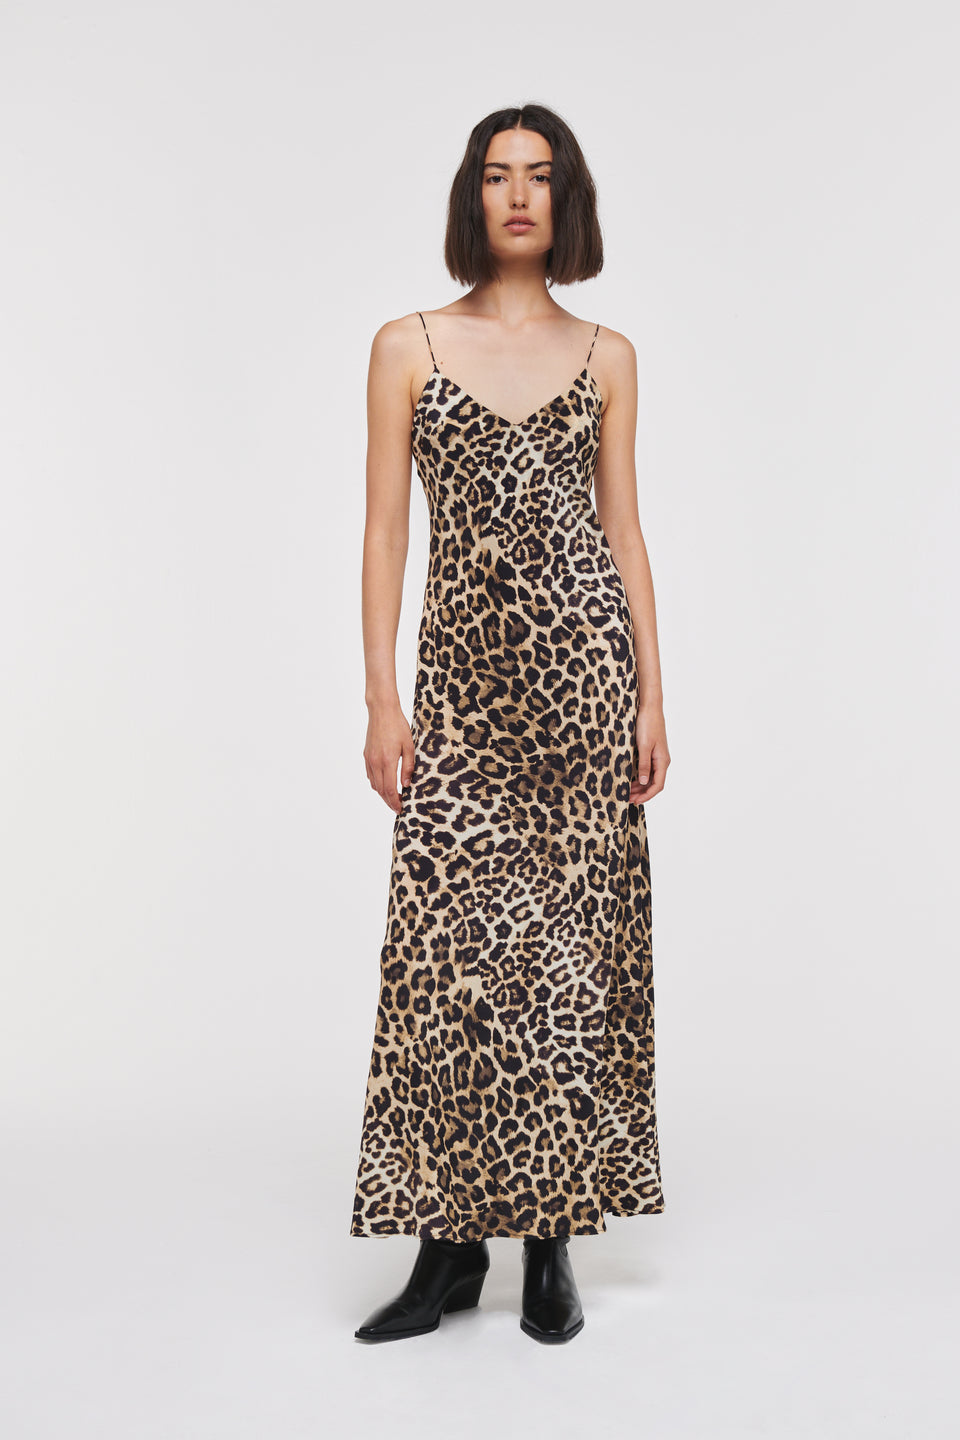 Alignes leopard print dress Kylie slip dress is designed in a statement-making leopard that's going to steal all the attention wherever you go. Designed in a flattering maxi length with a v-neck and spaghetti straps, it can be worn on its own or paired with a leather jacket or layered with a top for a more relaxed look.